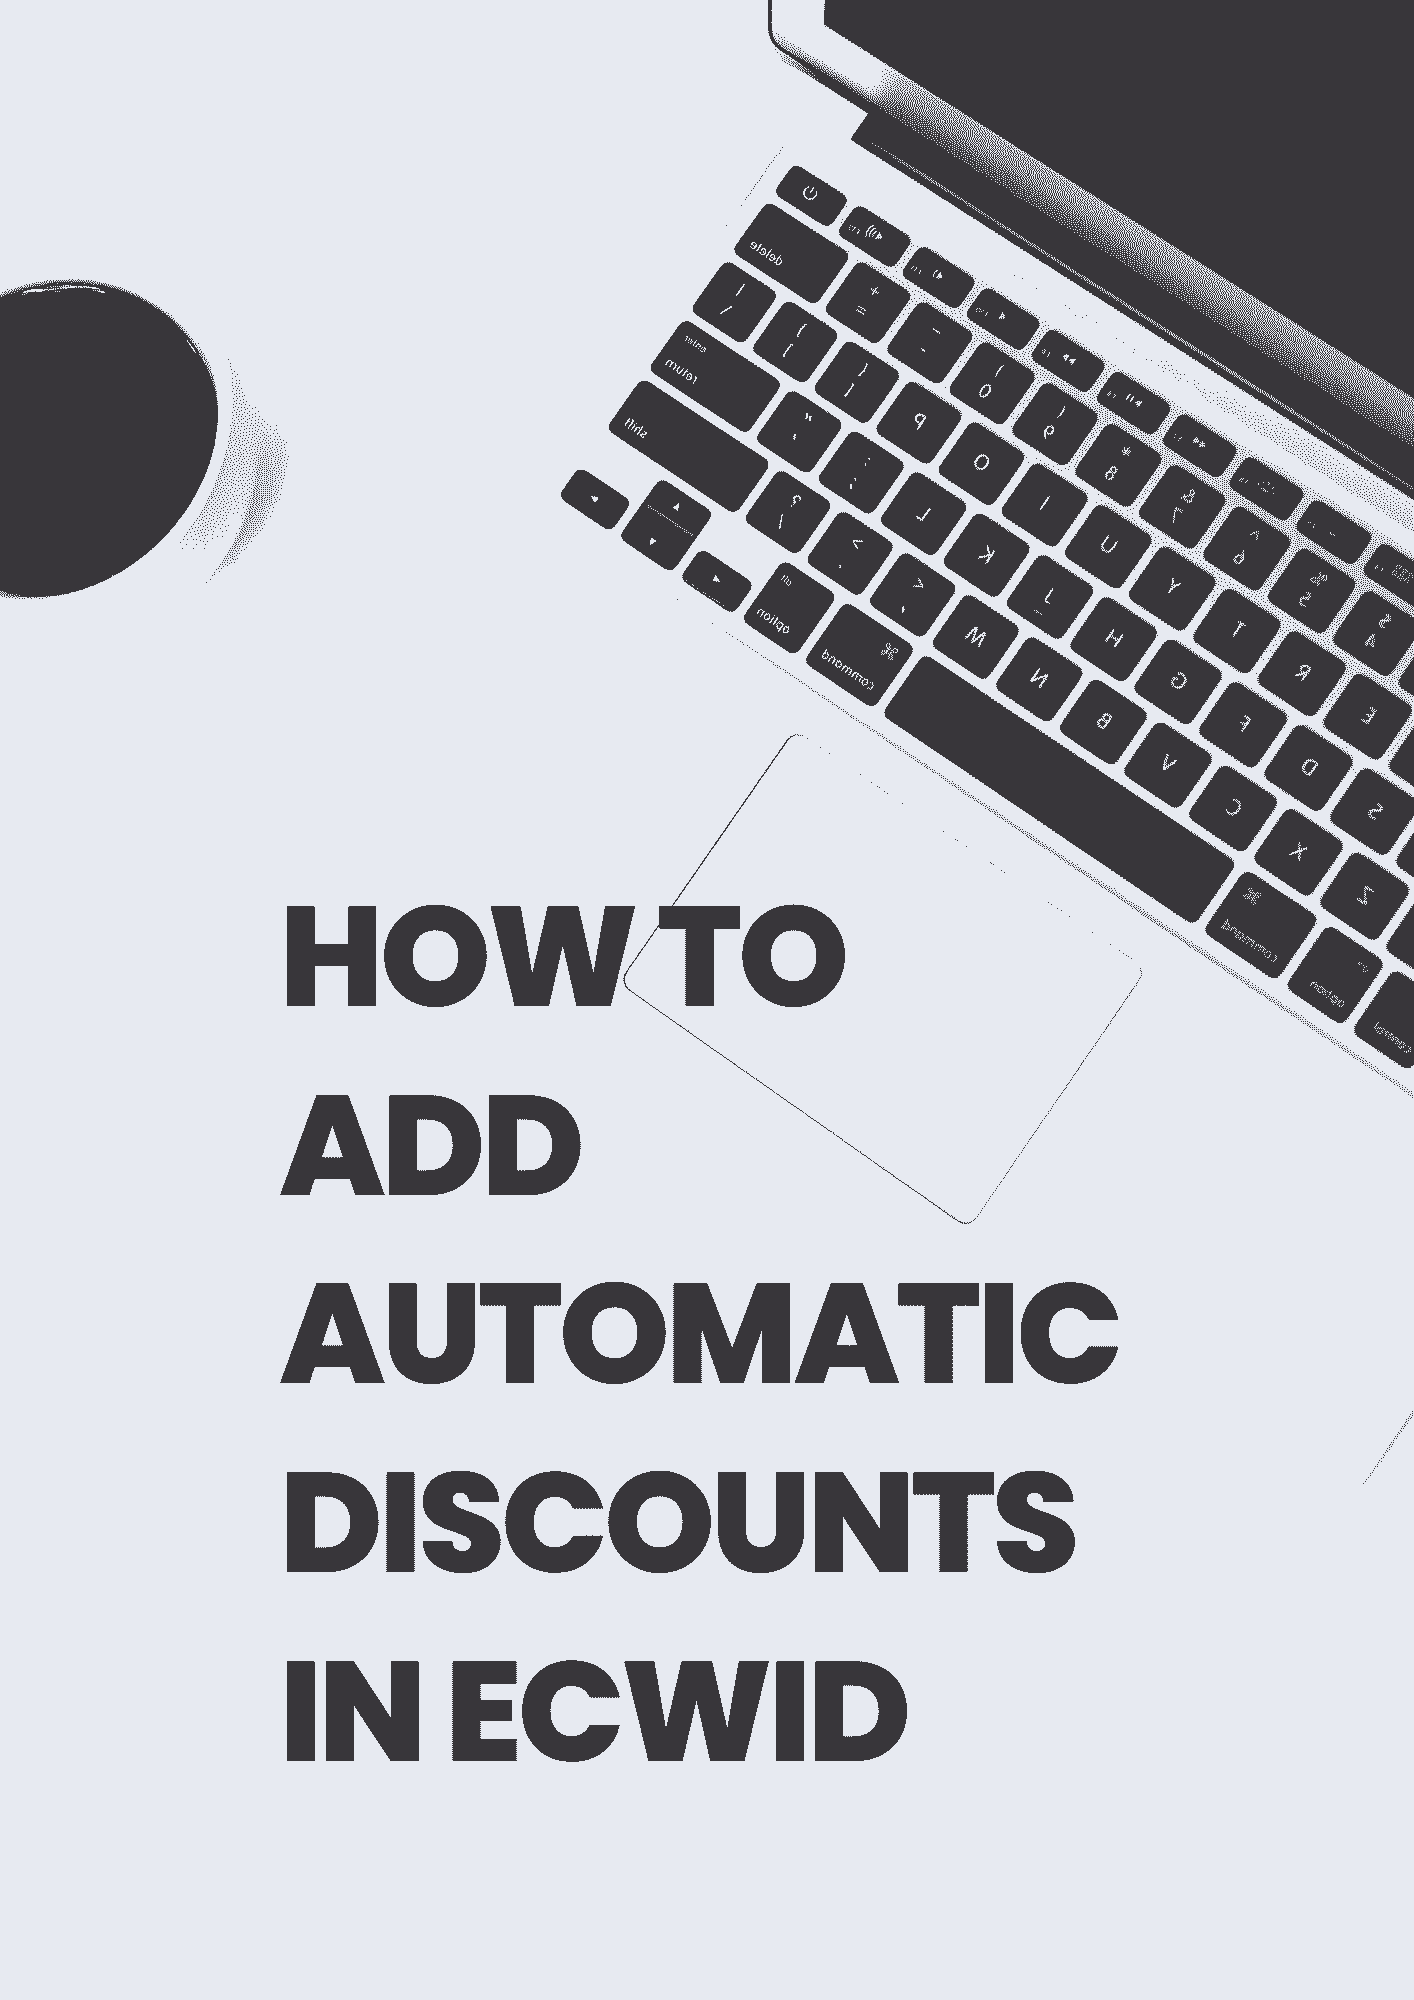 How to add automatic discounts in Ecwid